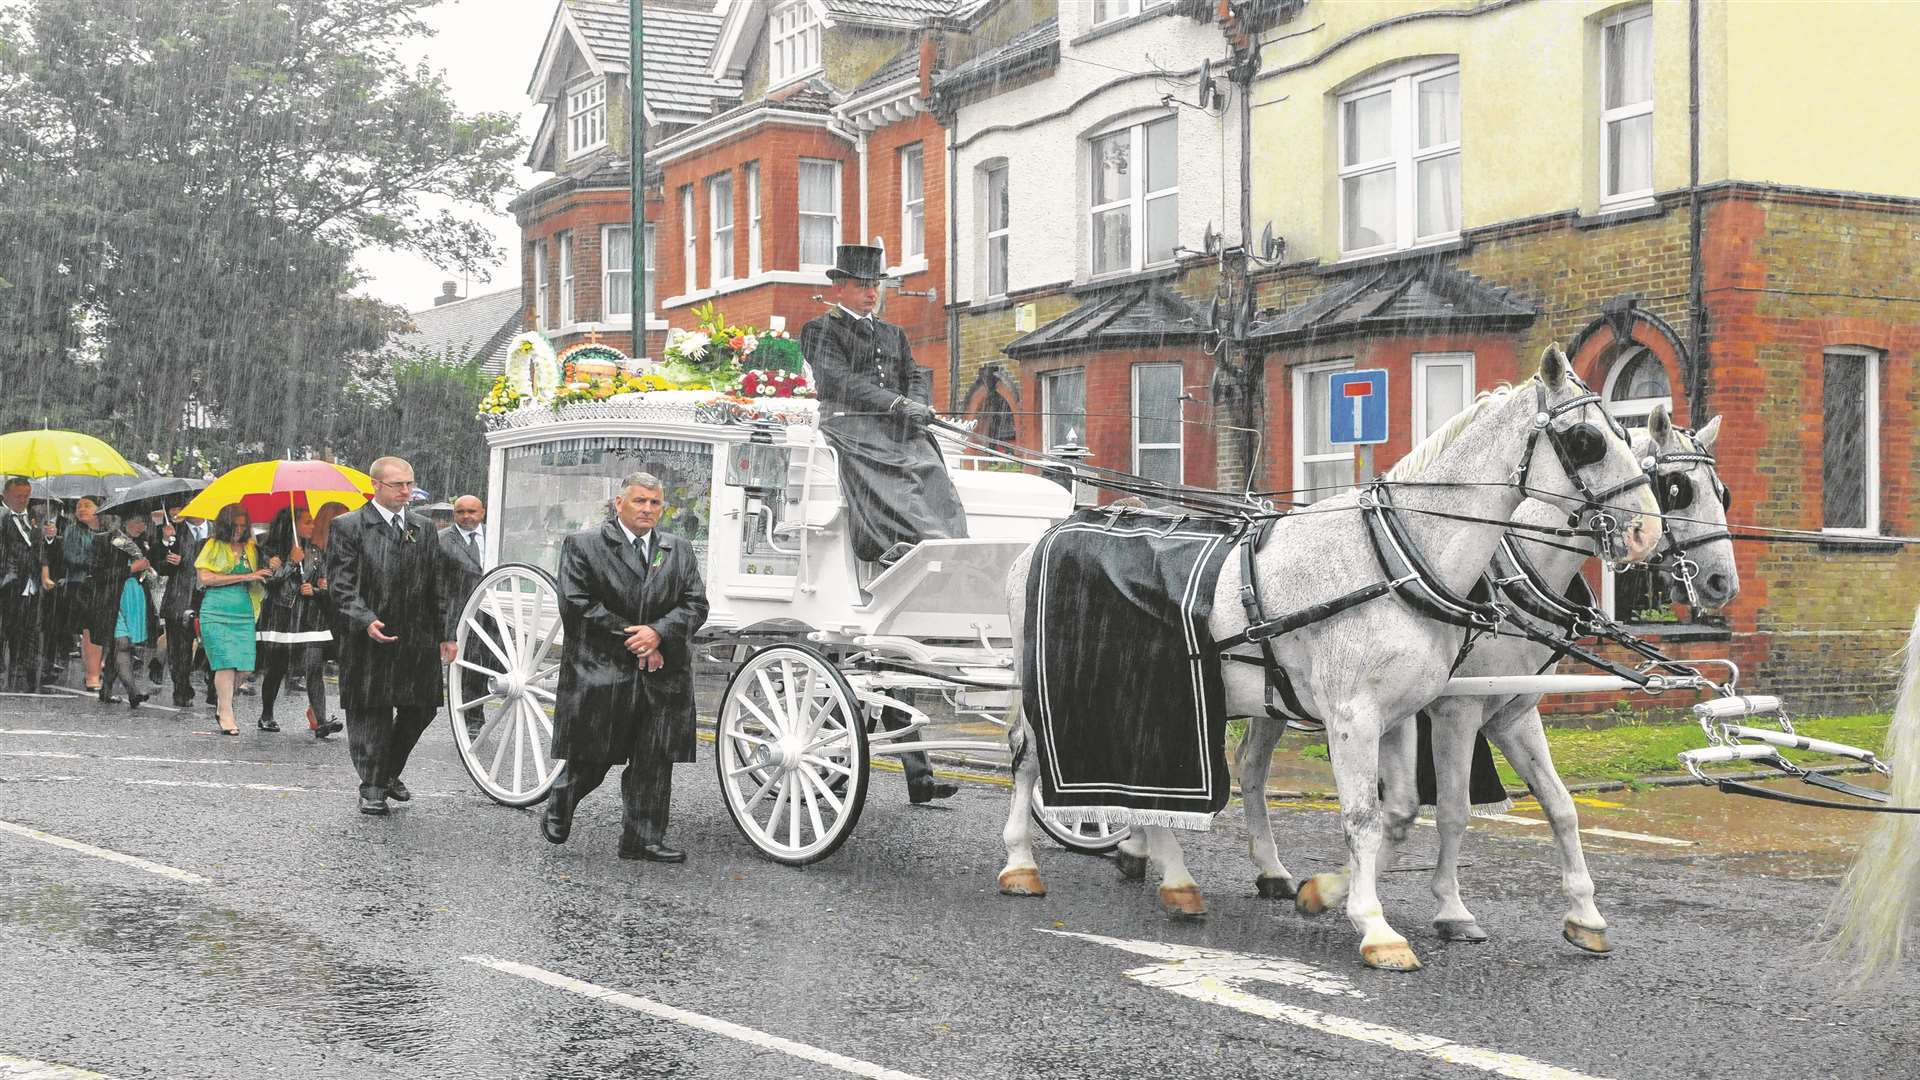 A horse drawn carriage arrives